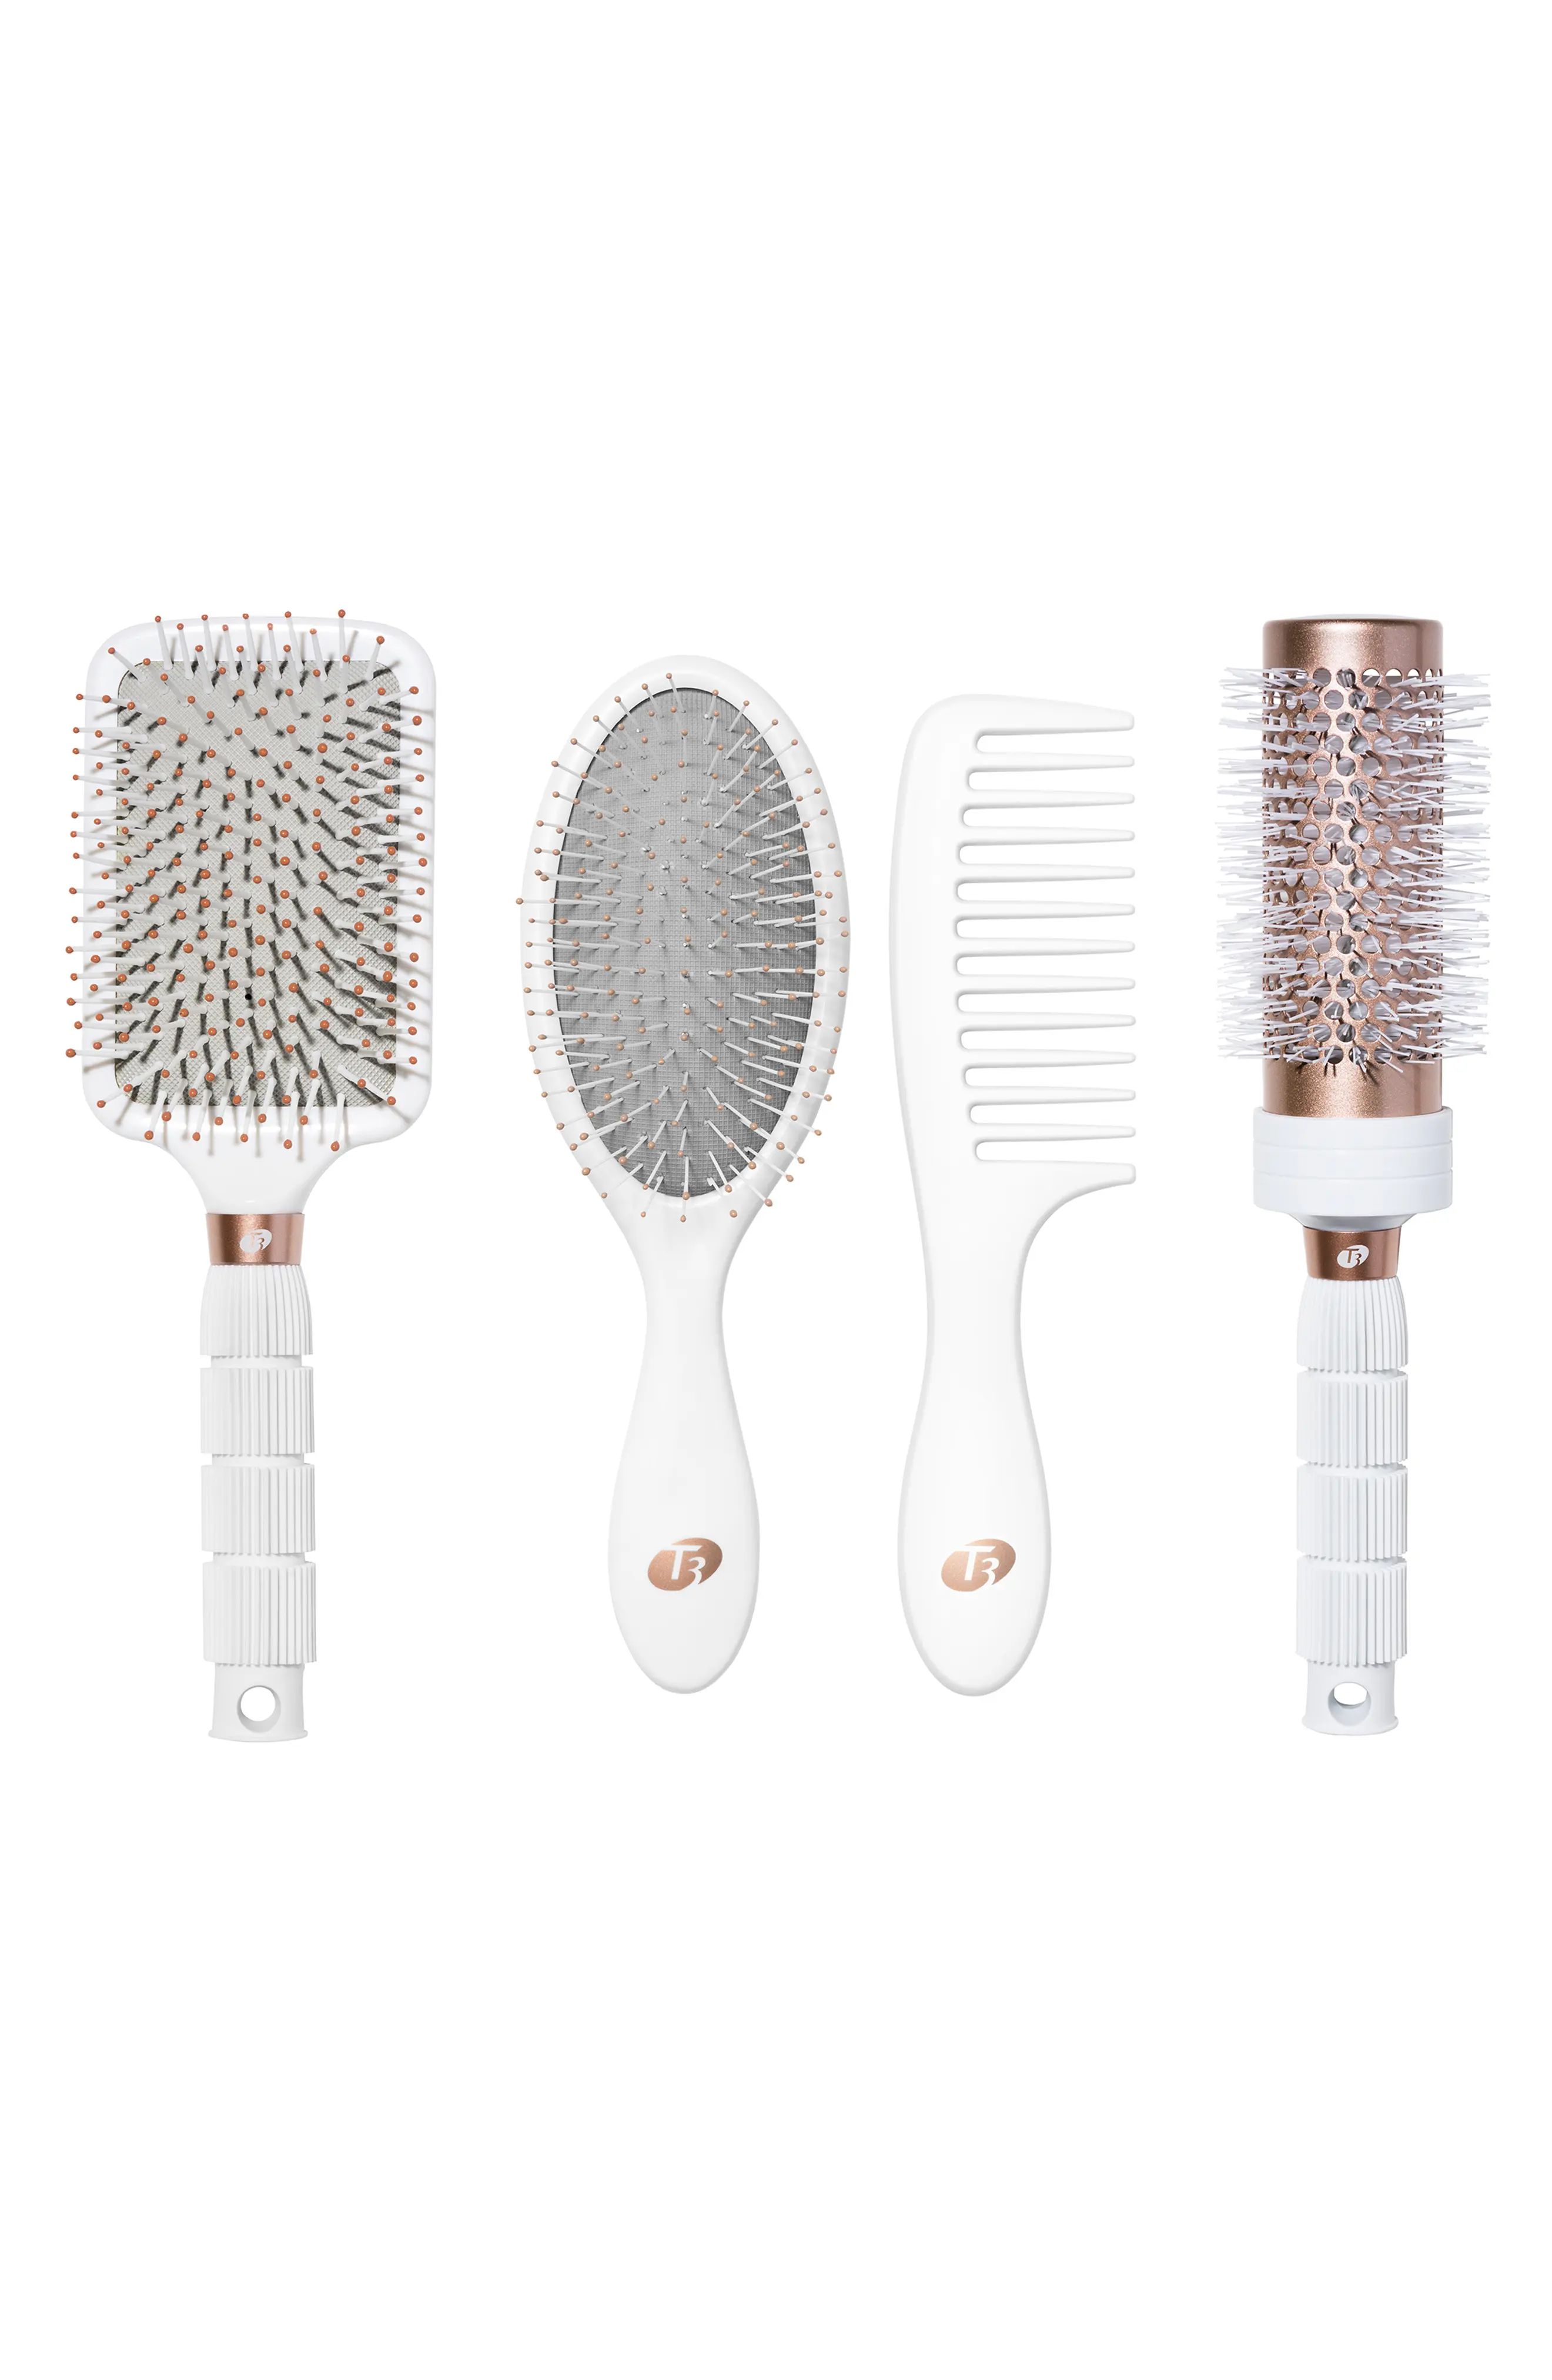 T3 Luxe Brush Set-$100 Value at Nordstrom | Nordstrom